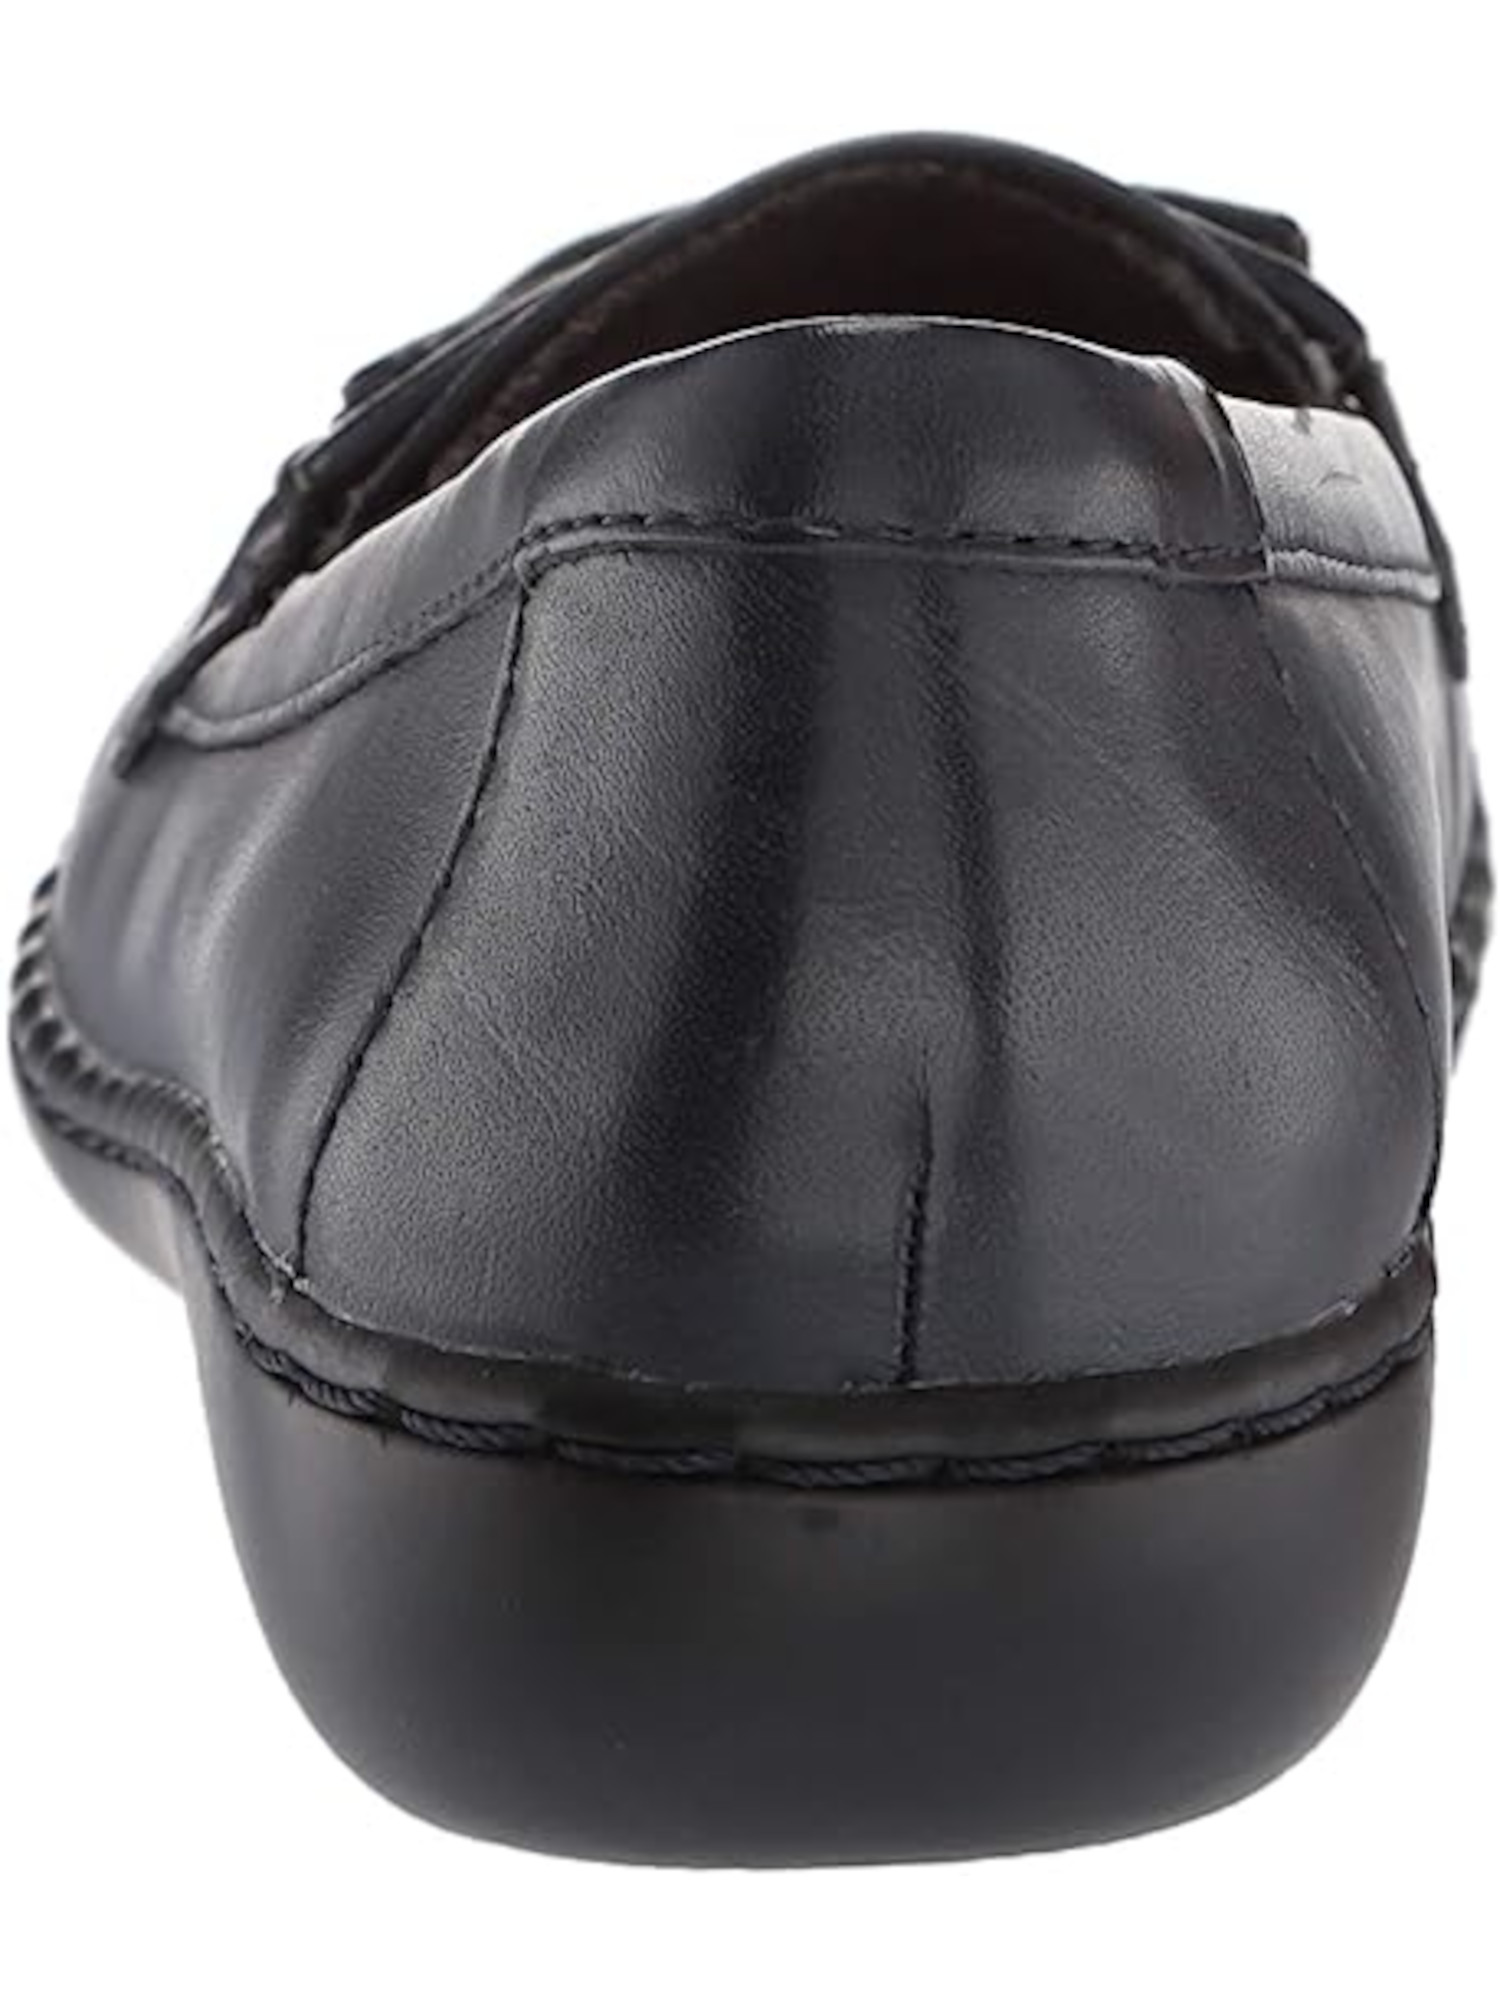 COLLECTION BY CLARKS Womens Black Goring Cushioned Comfort Ashland Lily Round Toe Wedge Slip On Leather Loafers Shoes 9 M